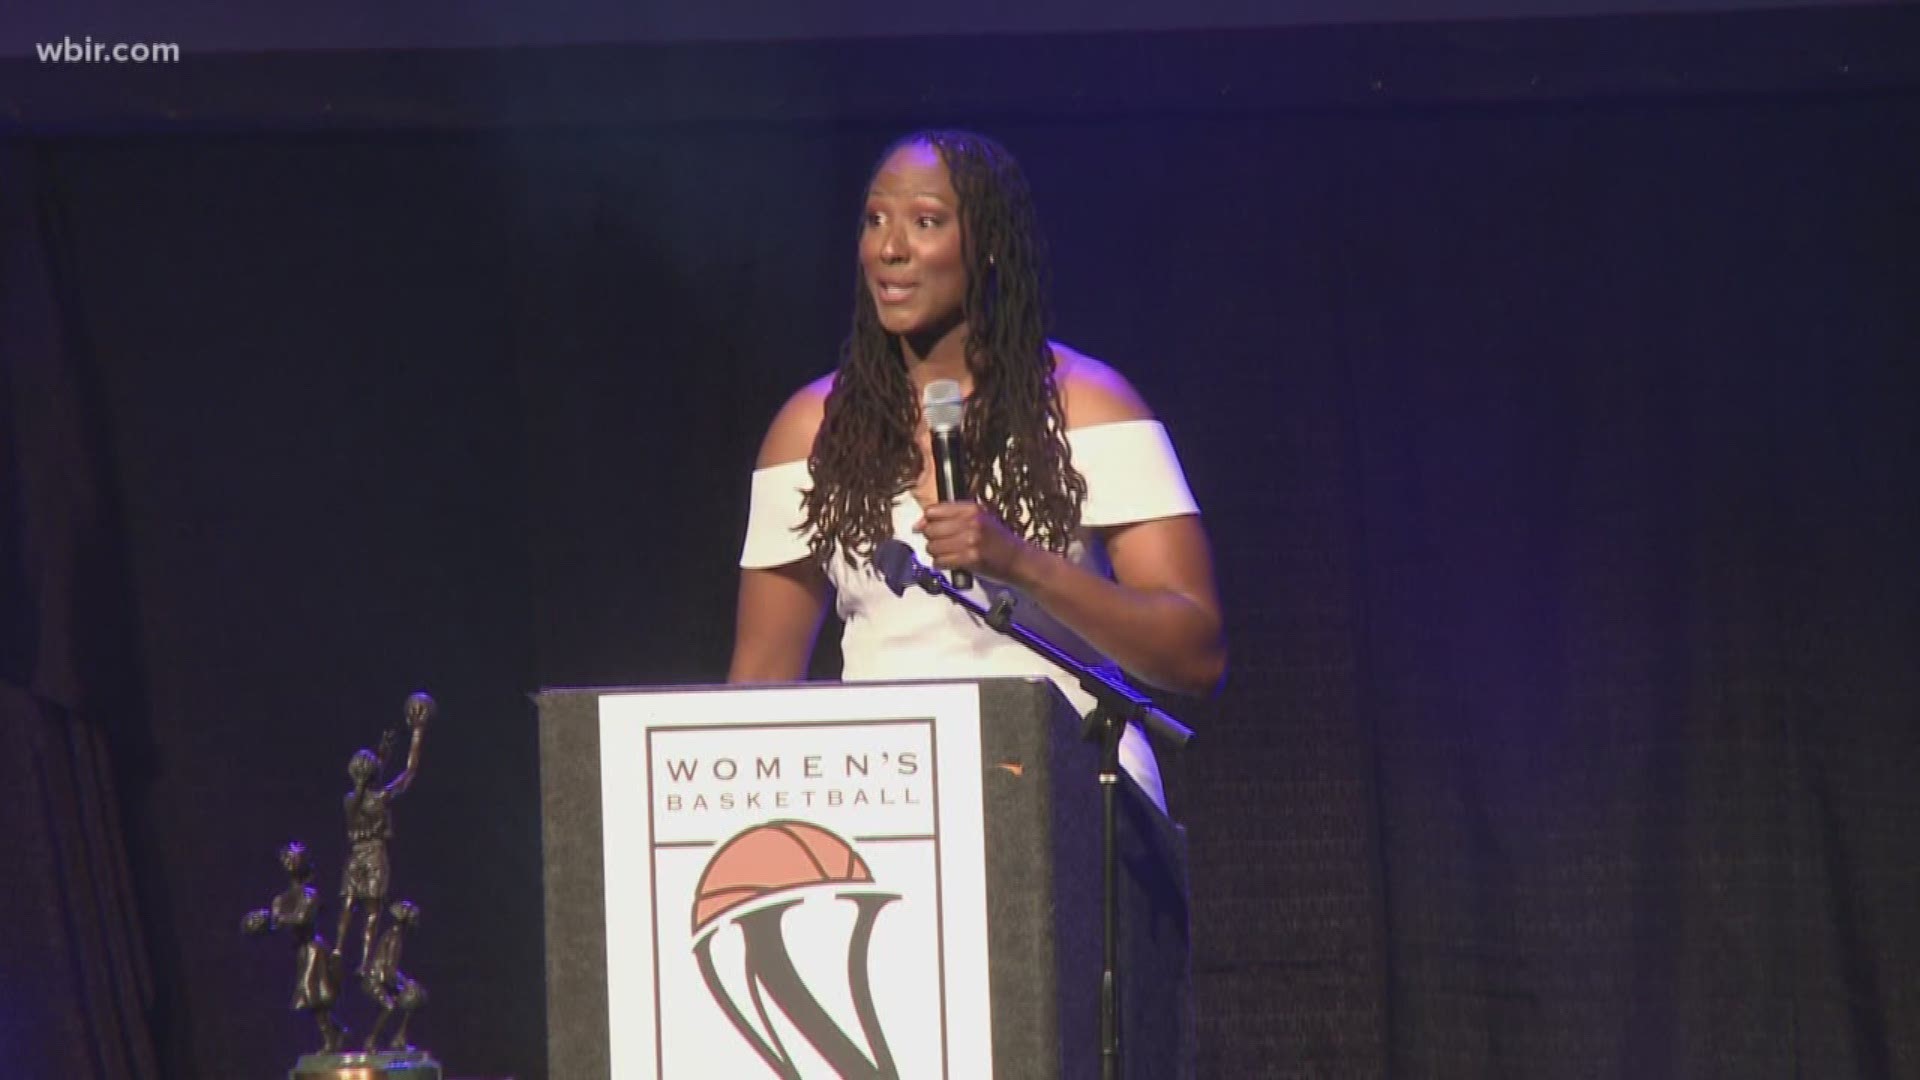 2018 Women's Basketball Hall of Fame induction ceremony.